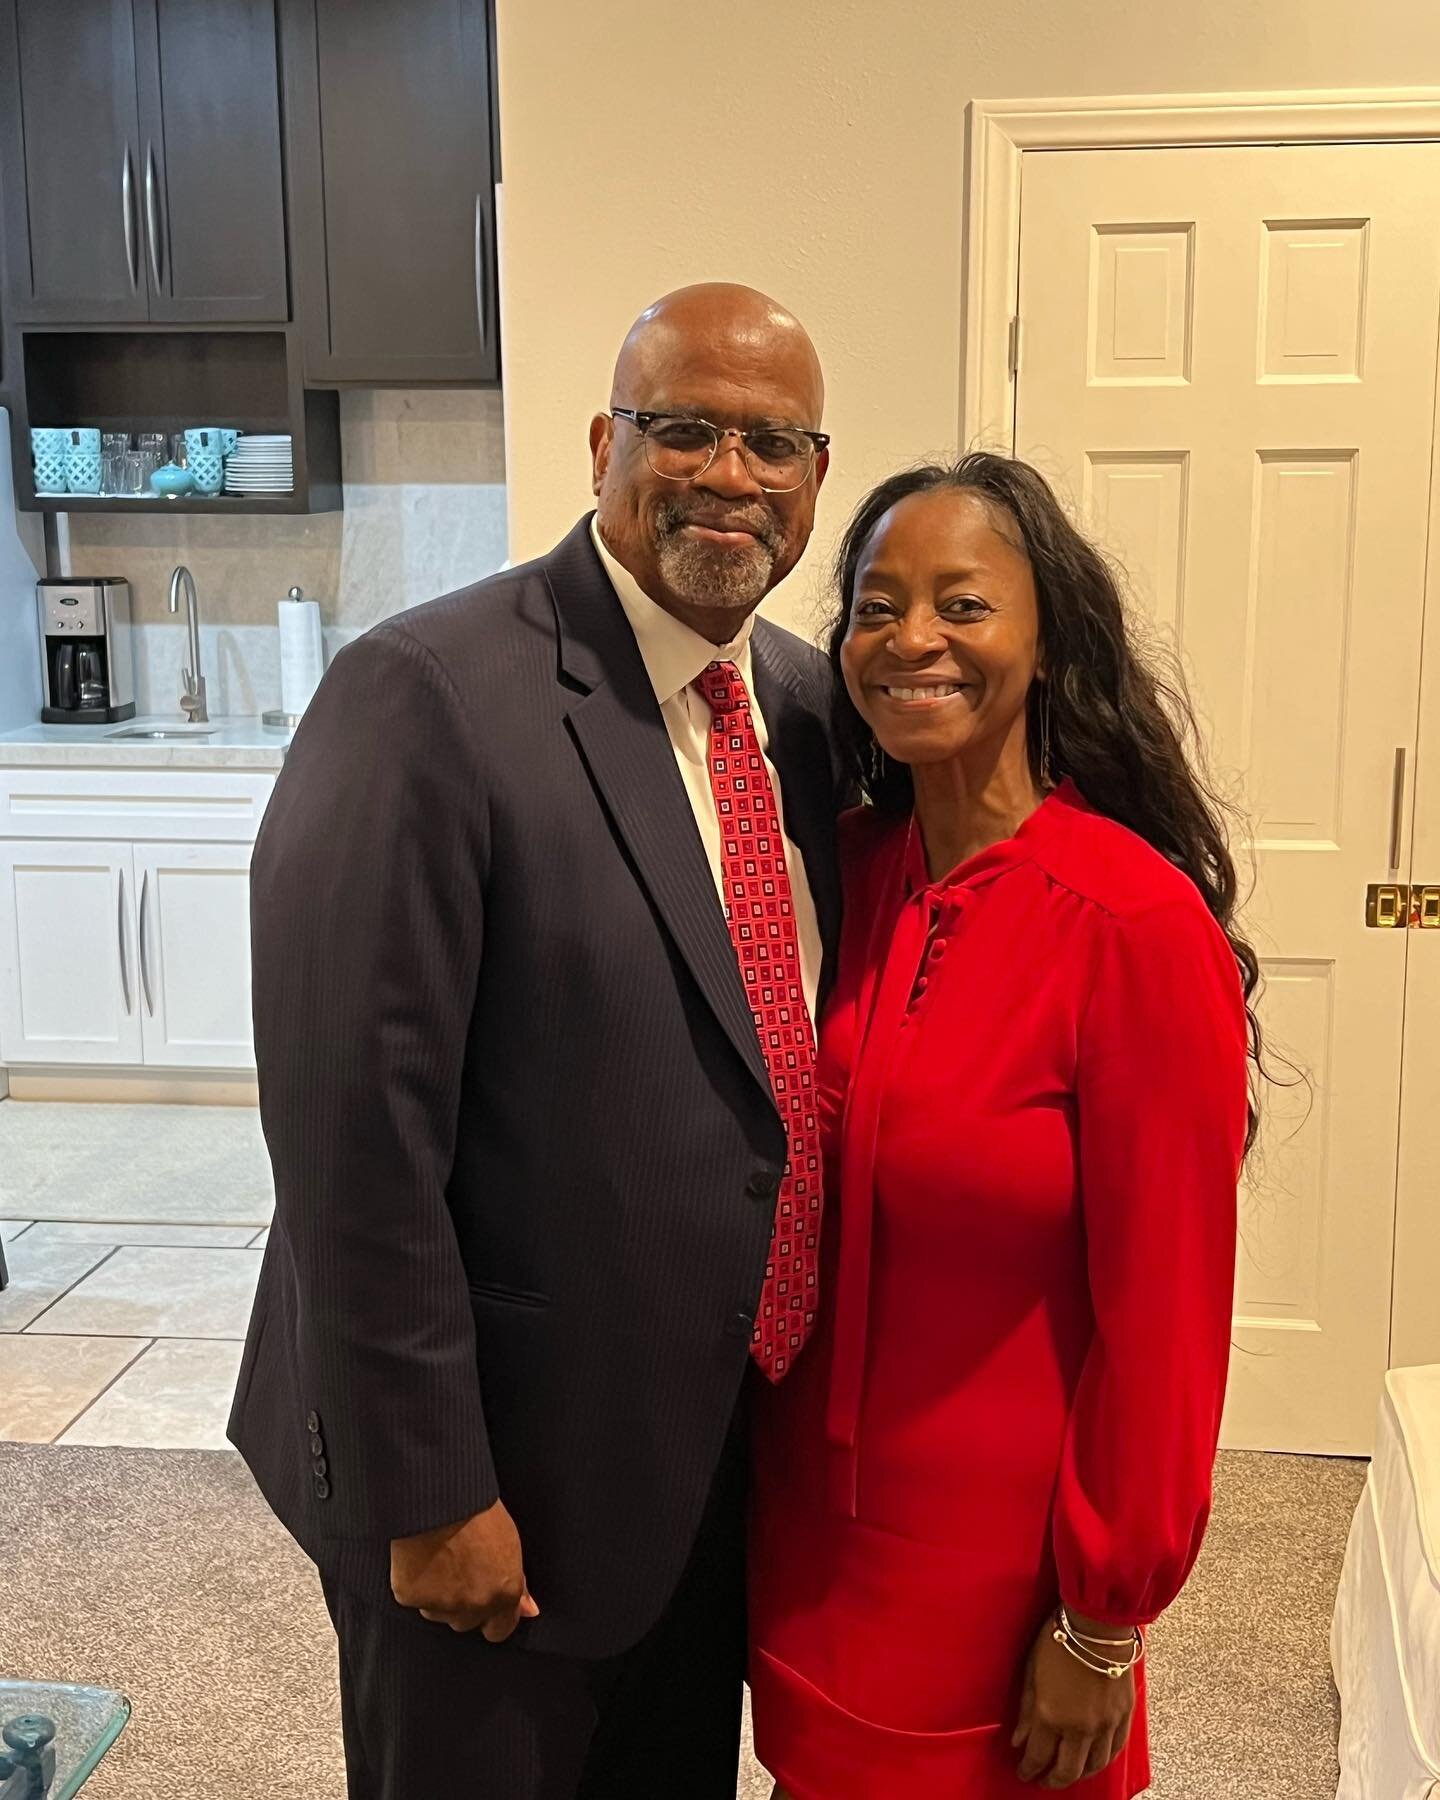 More from the campaign trail.  Working until the last minute!  Let&rsquo;s do it!!

#christopherdardenforjudge #christopherdarden #getoutthevote #camapigntrail #wellqualified #moreexperience #thechoice #herecomesthejudge #voteforme